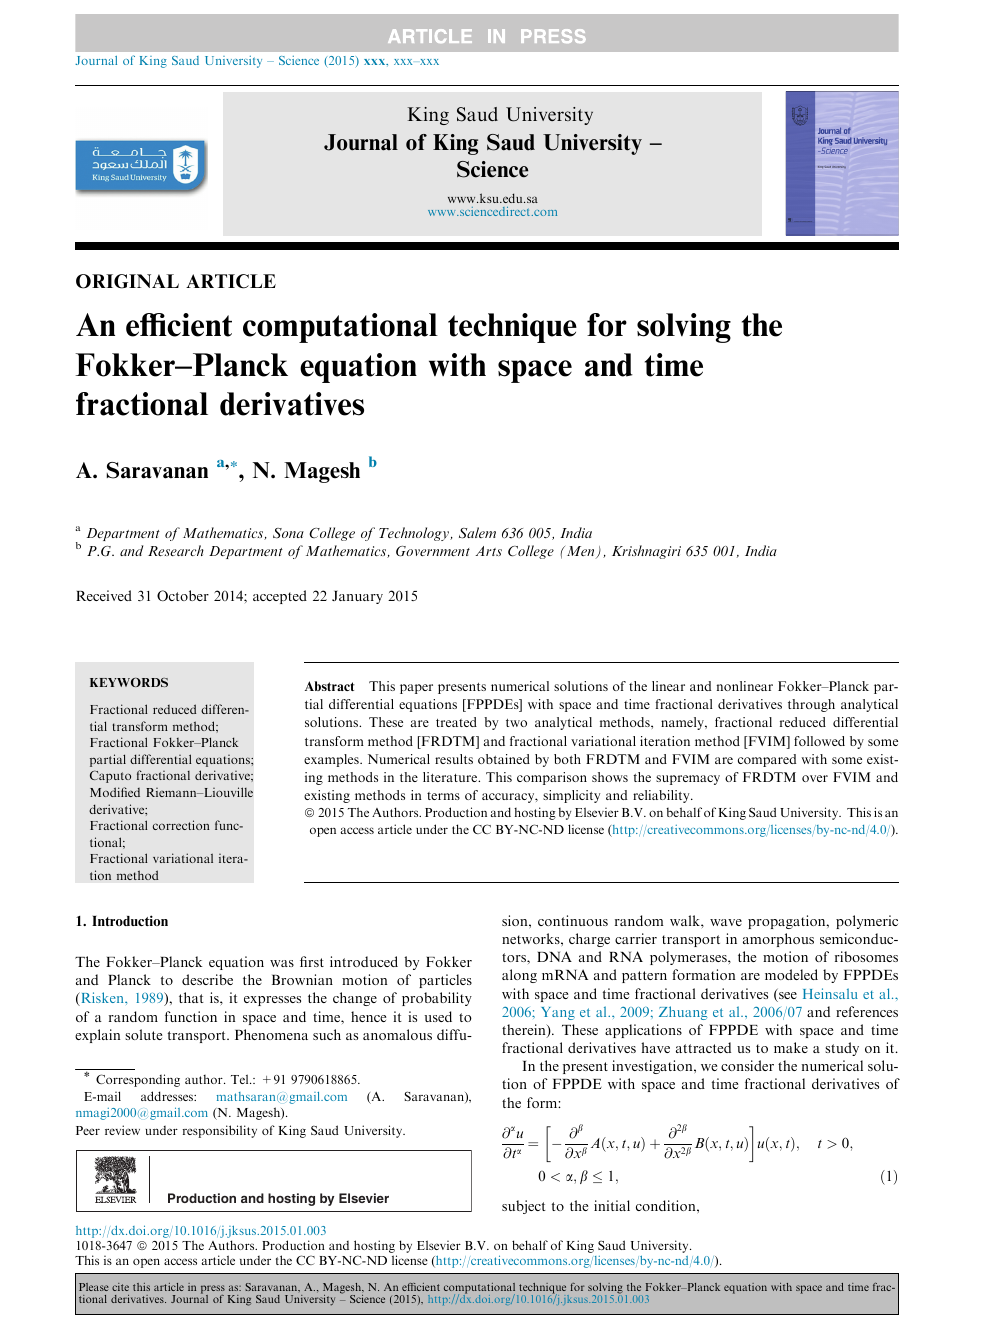 An Efficient Computational Technique For Solving The Fokker Planck Equation With Space And Time Fractional Derivatives Topic Of Research Paper In Mathematics Download Scholarly Article Pdf And Read For Free On Cyberleninka